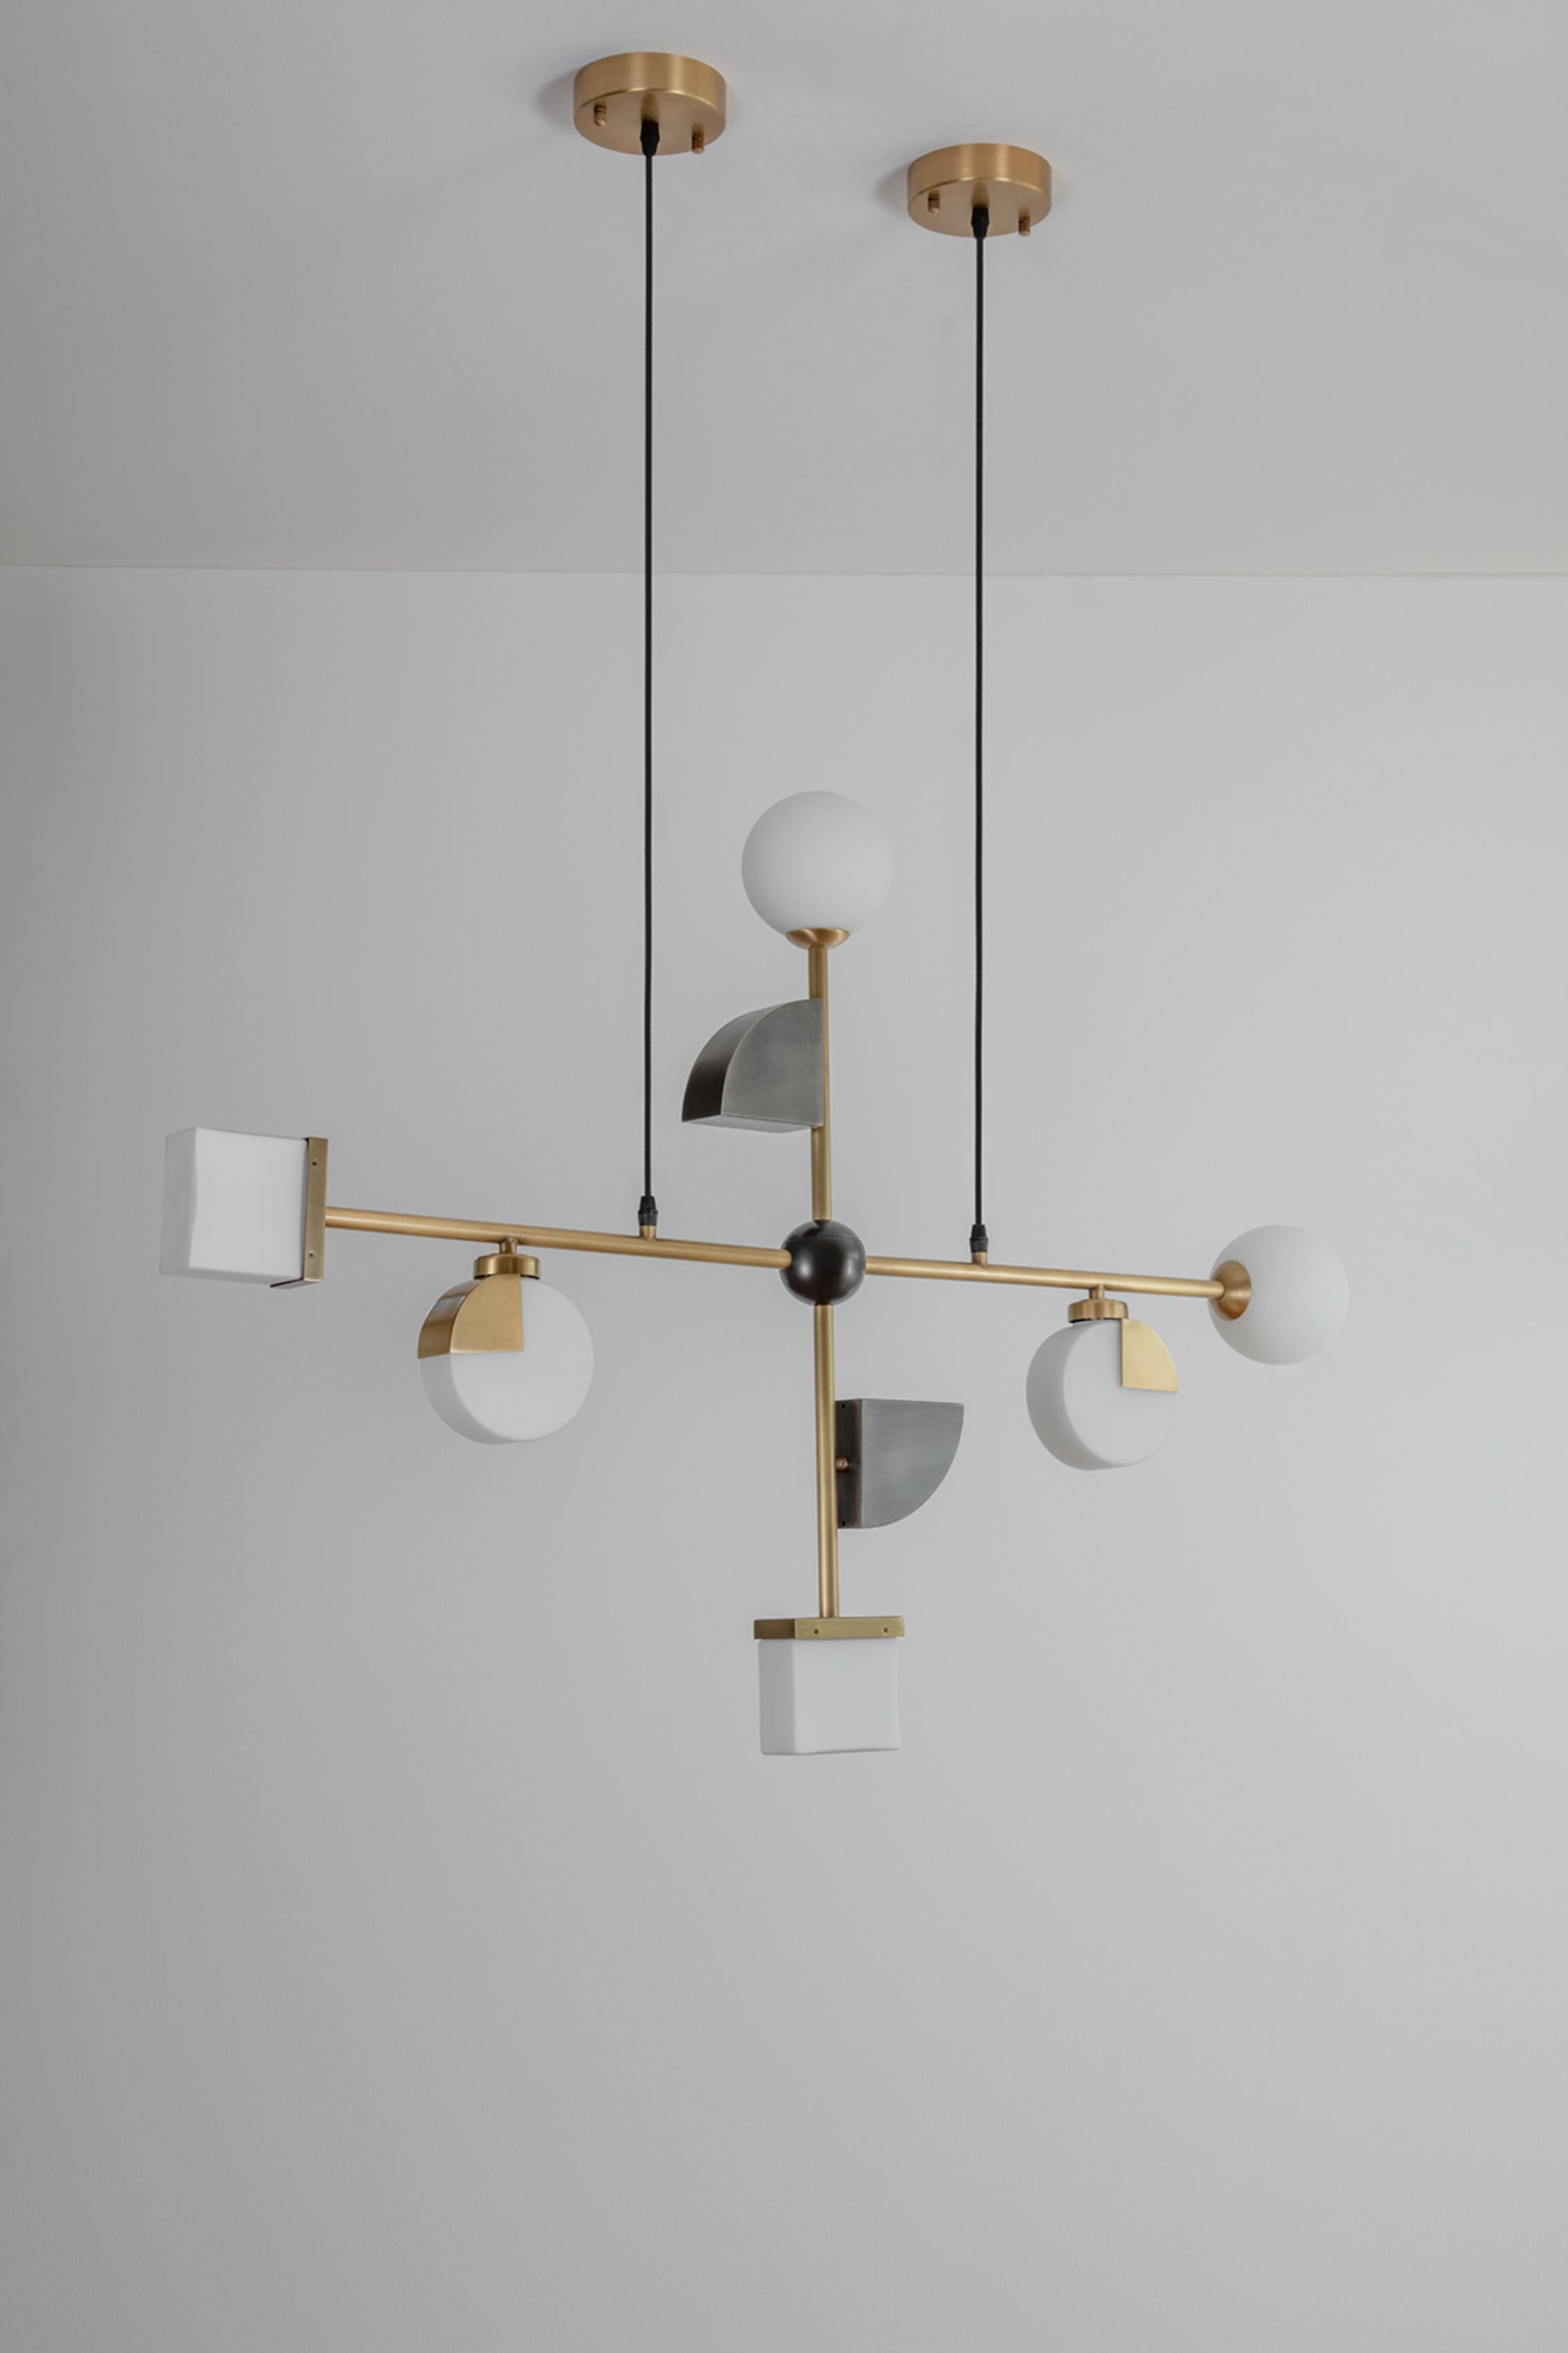 Signature Pendant Light by Square in Circle
Dimensions: D 108 x W 10 x H 76 cm
Materials: Brushed brass/ white frosted glass/ brushed grey metal/ black fabric flex
Other finishes available.

This pendant light is designed taking inspiration from our